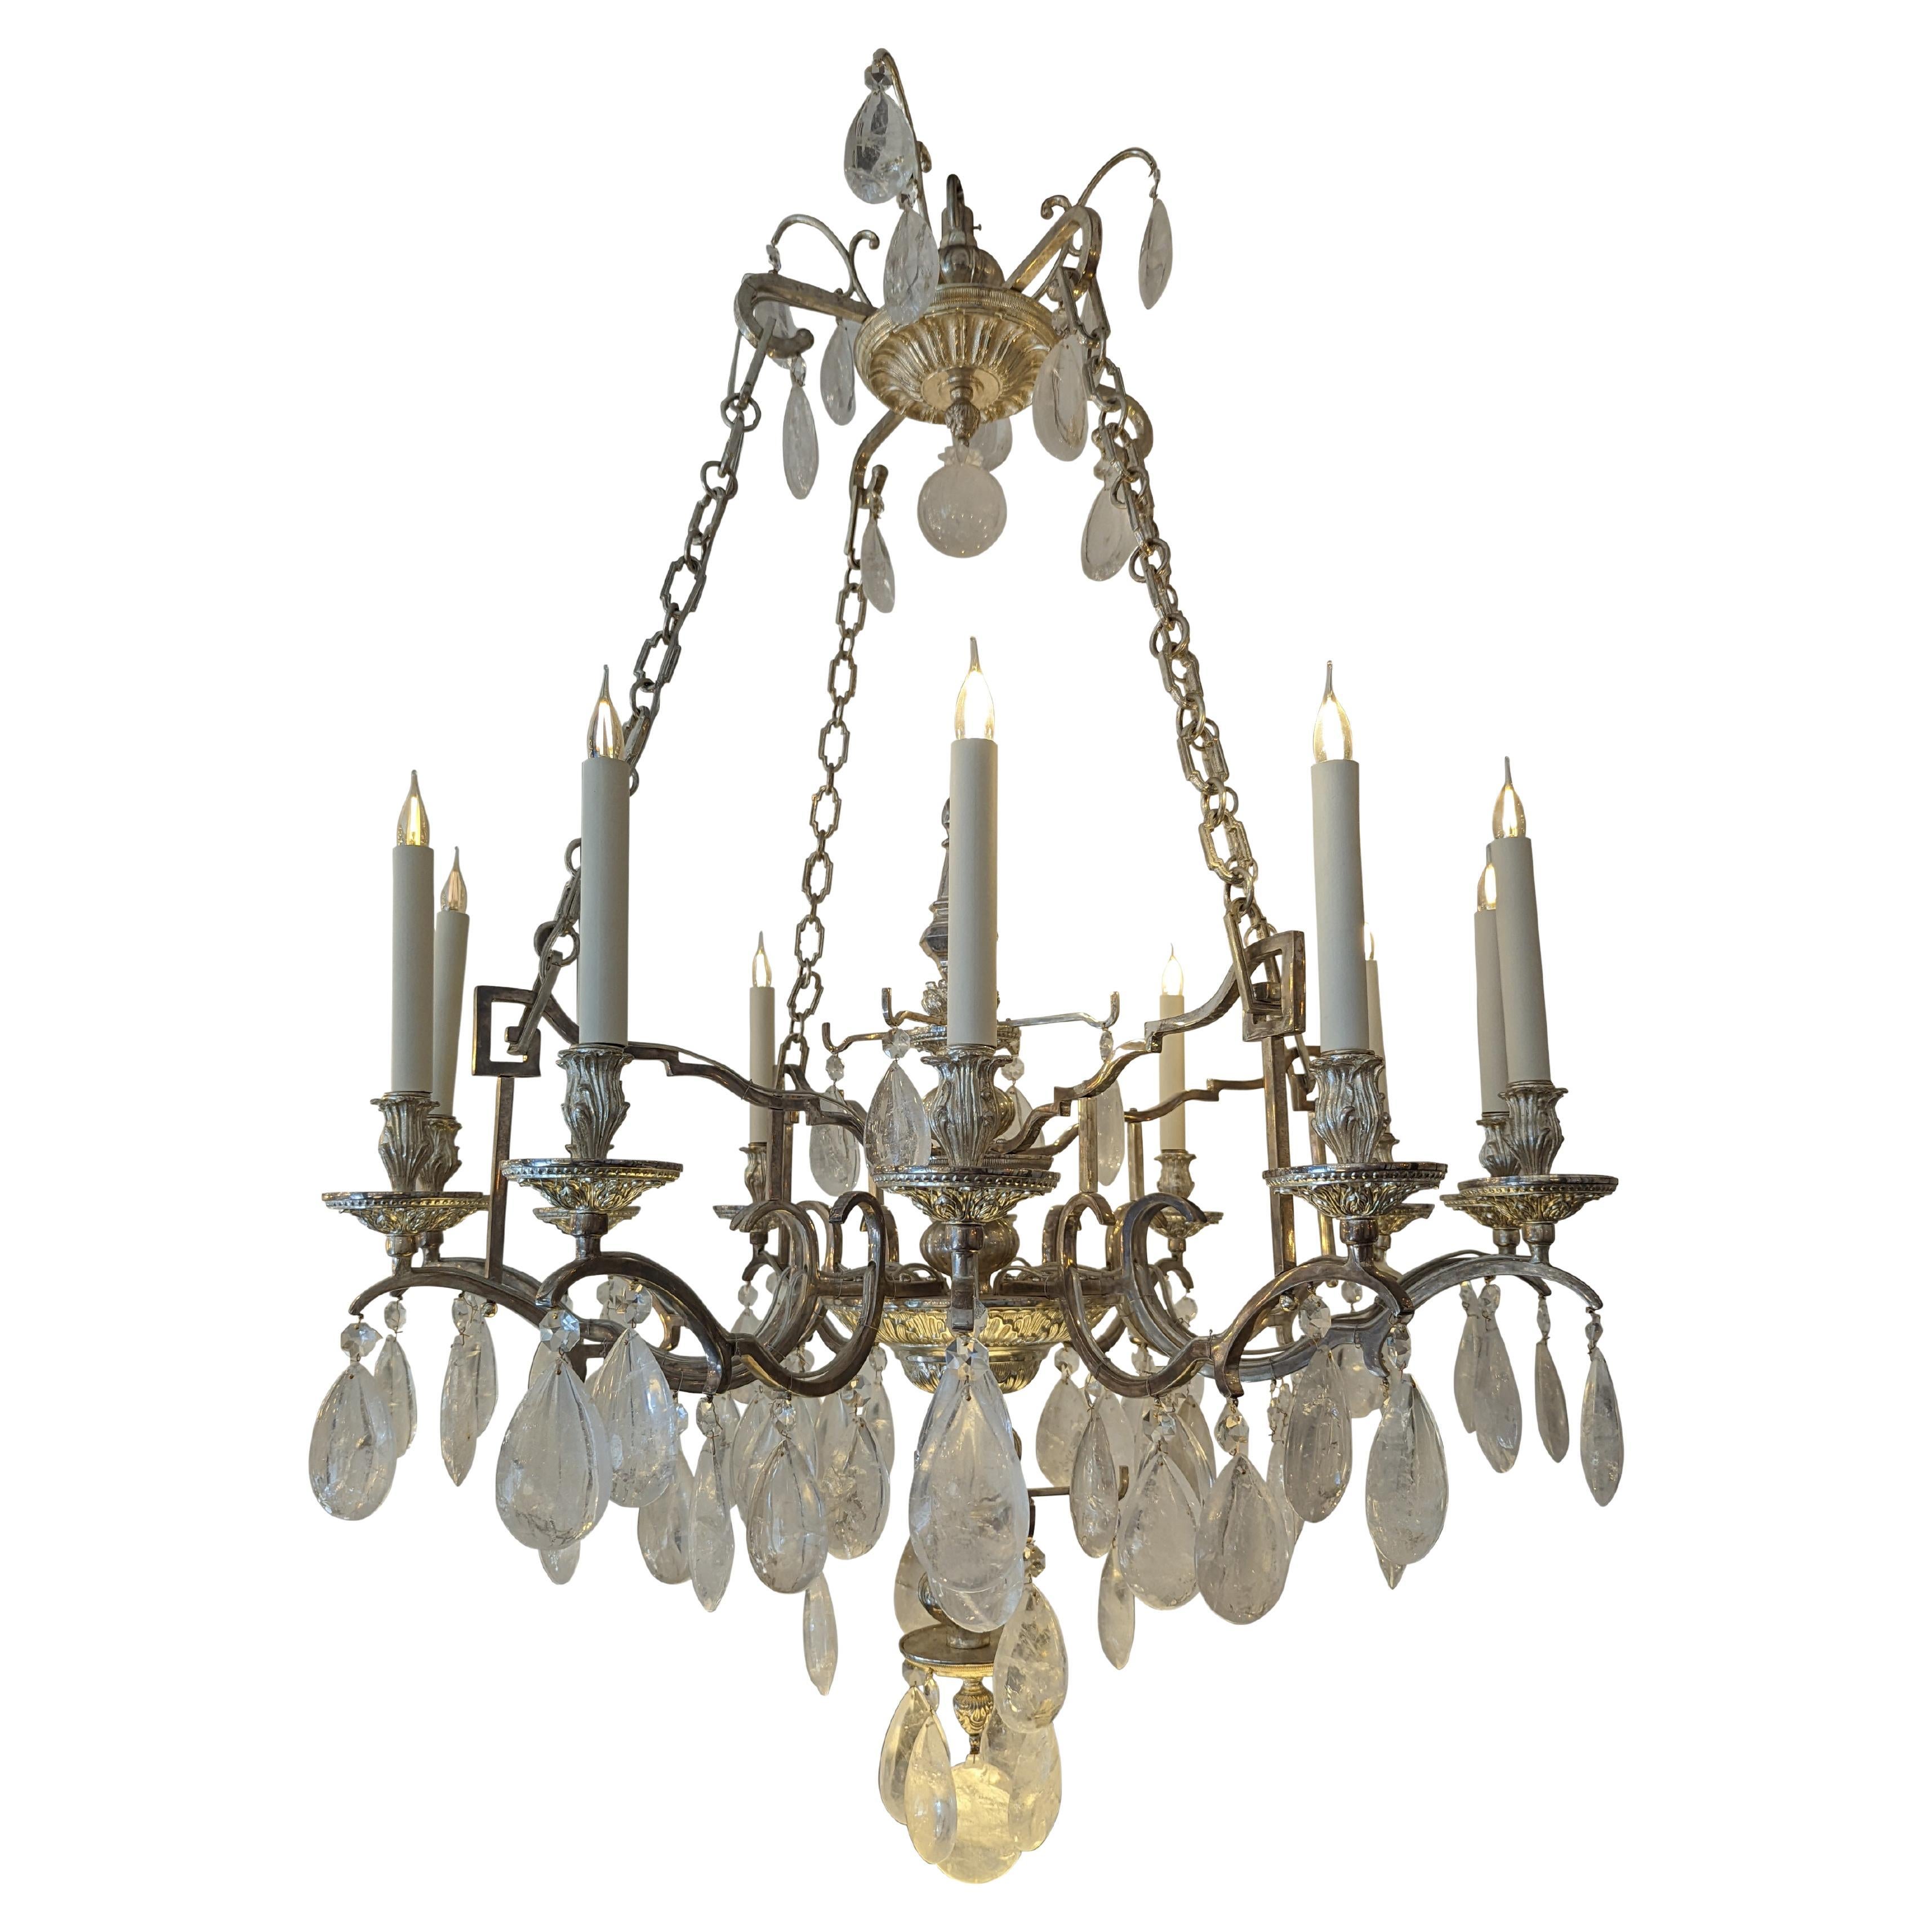 1 Rock Crystal Chaine Chandelier of 12 Lights in Bronze & with Nickel Finish